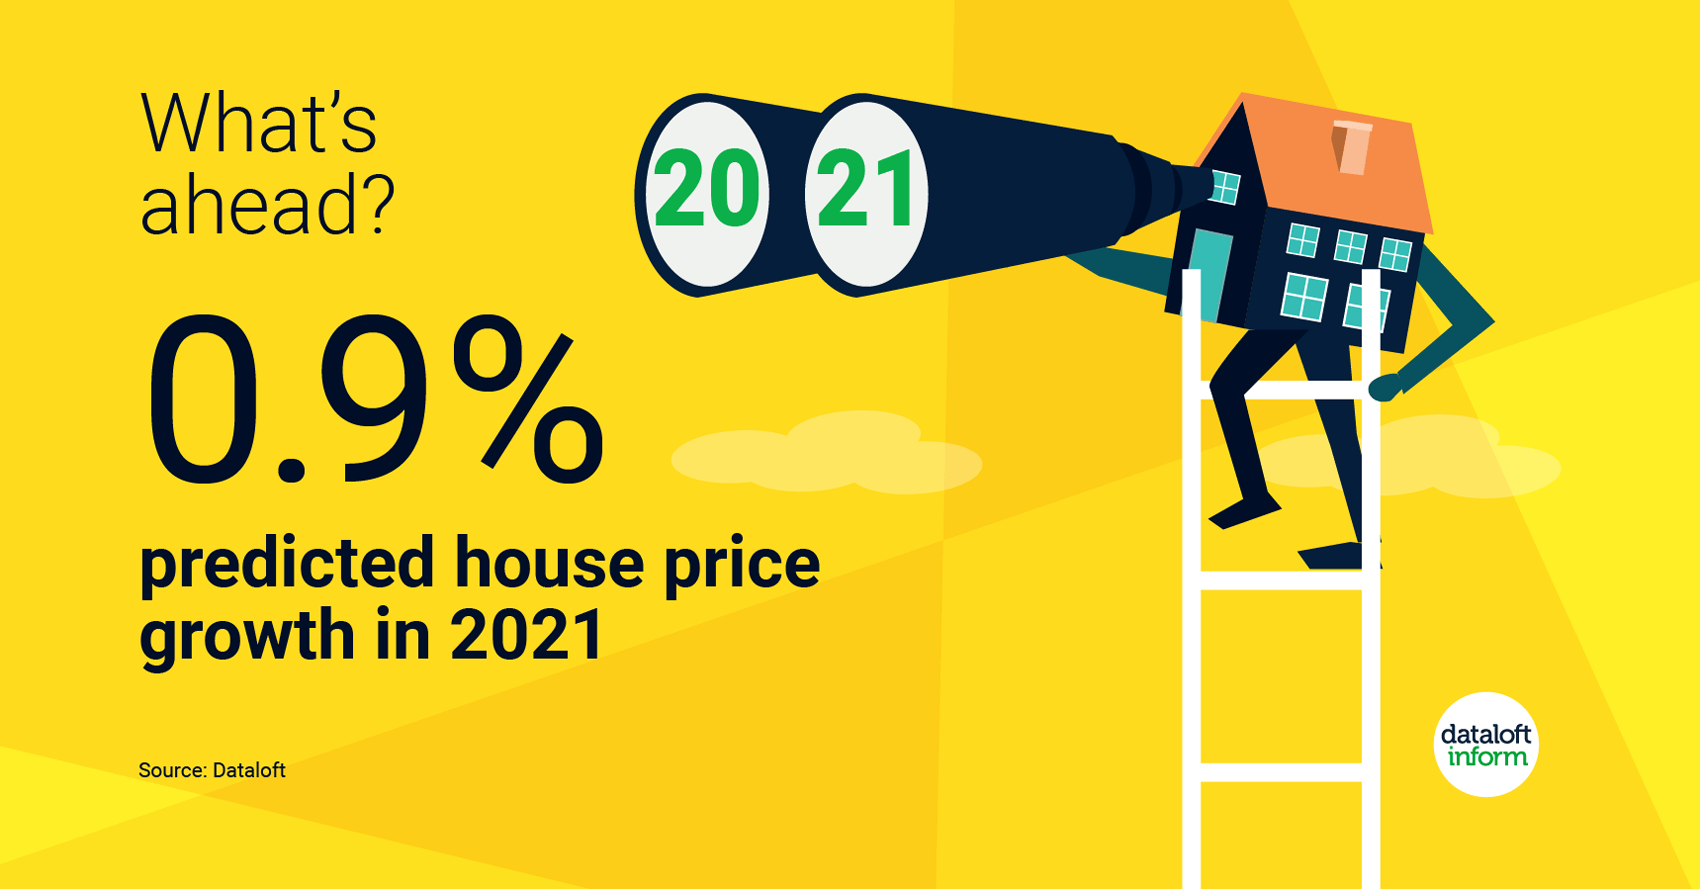 house price growth prediction 2021 infographic